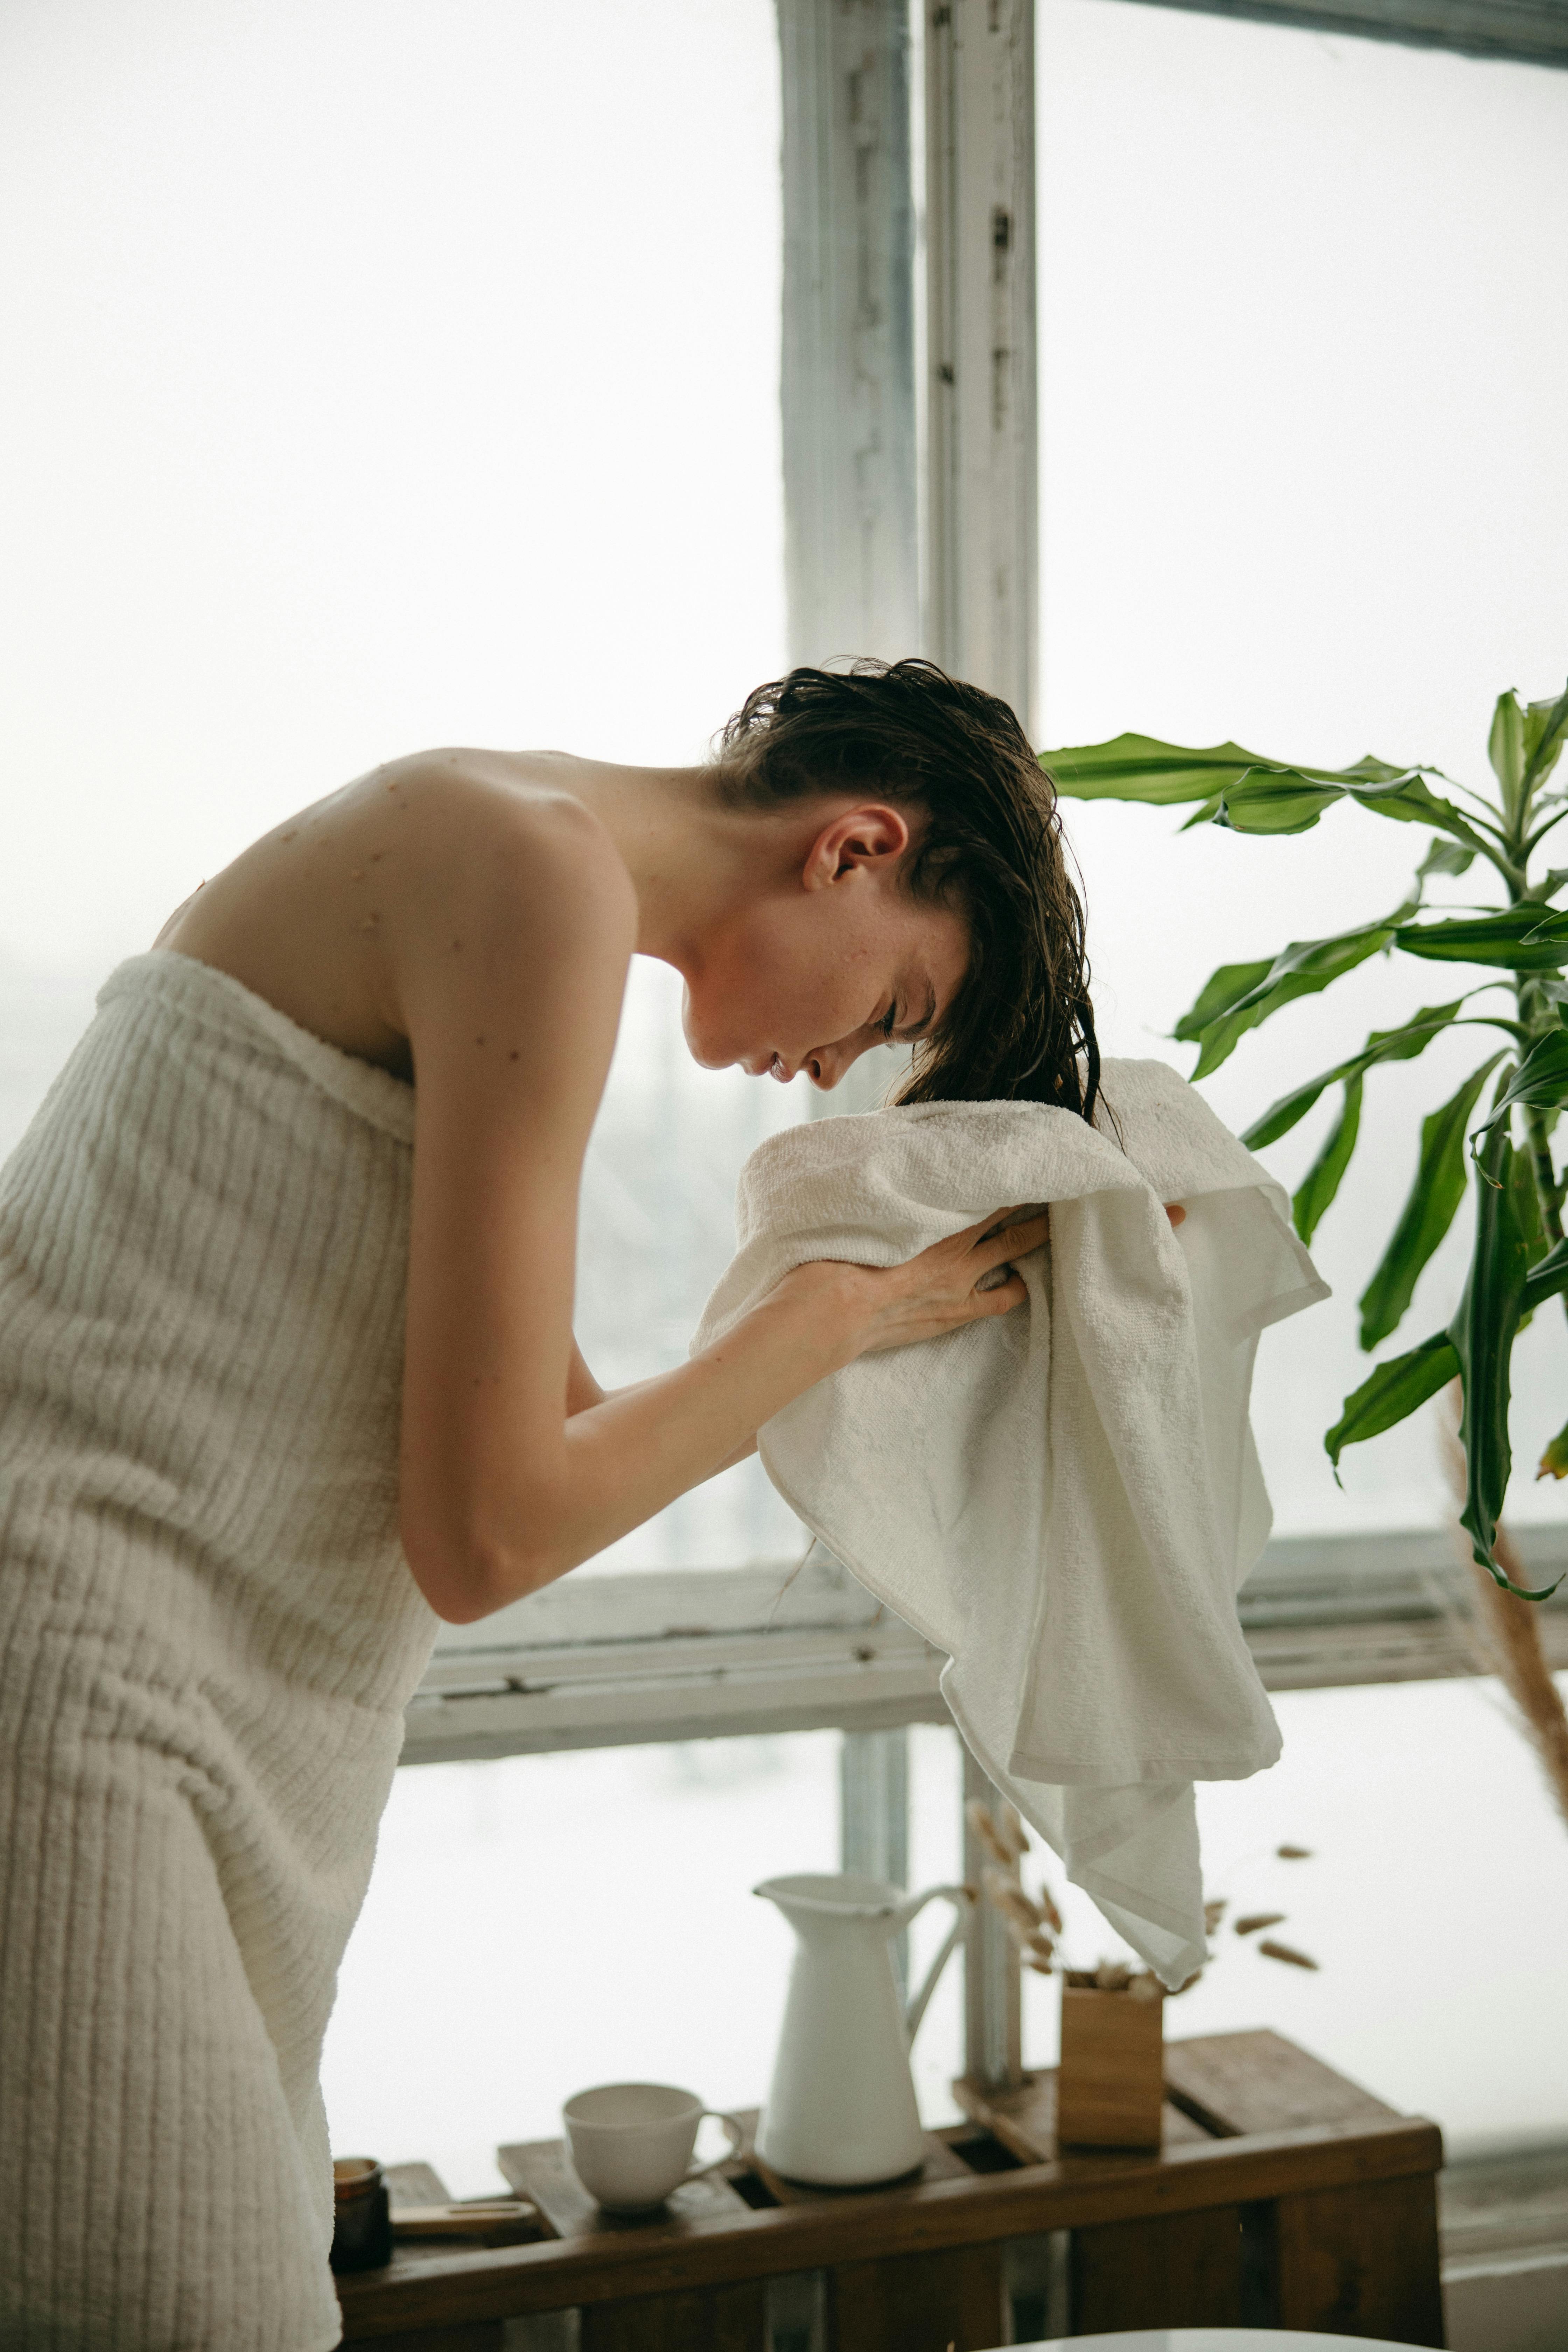 A woman drying her hair with a towel after showering | Source: Pexels